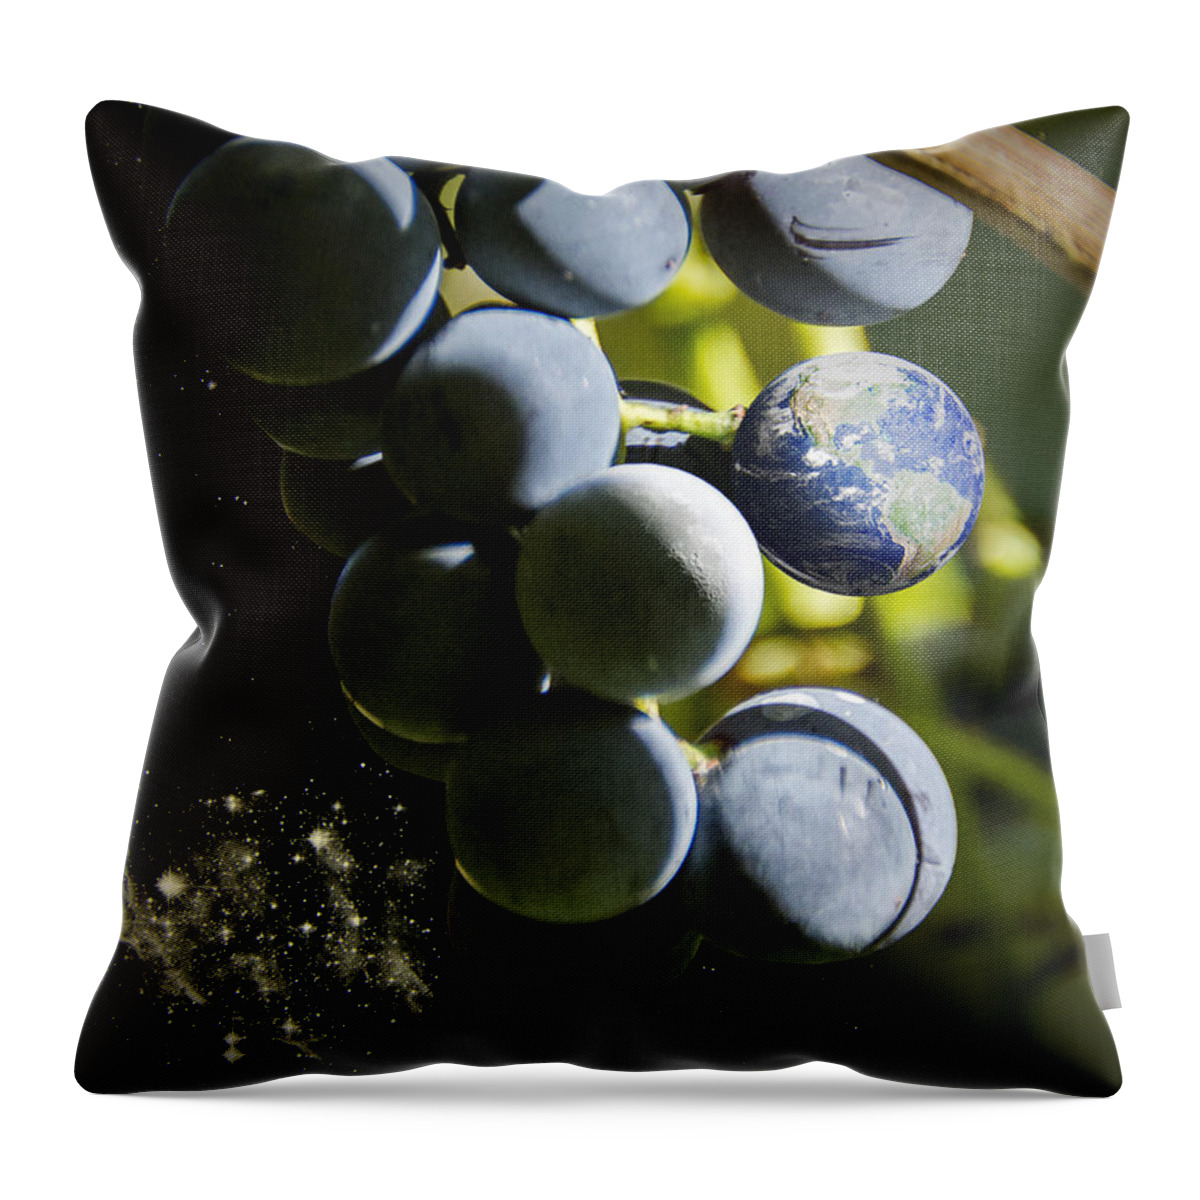 2d Throw Pillow featuring the photograph Fruit Of The Vine by Brian Wallace